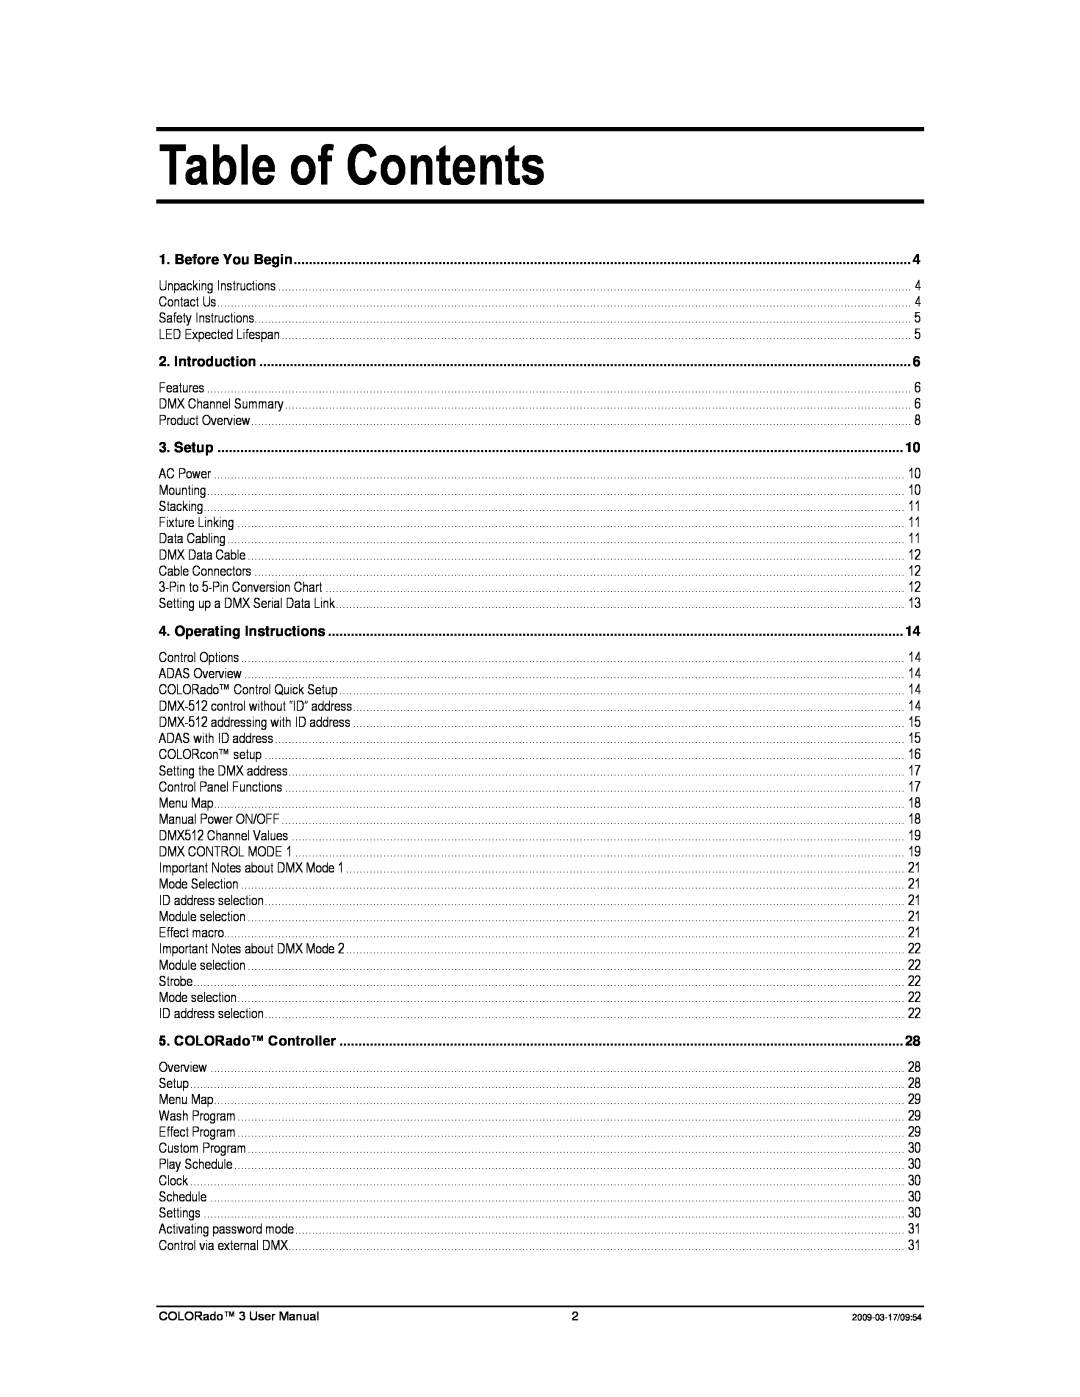 Chauvet 3P user manual Table of Contents, COLORado Controller 